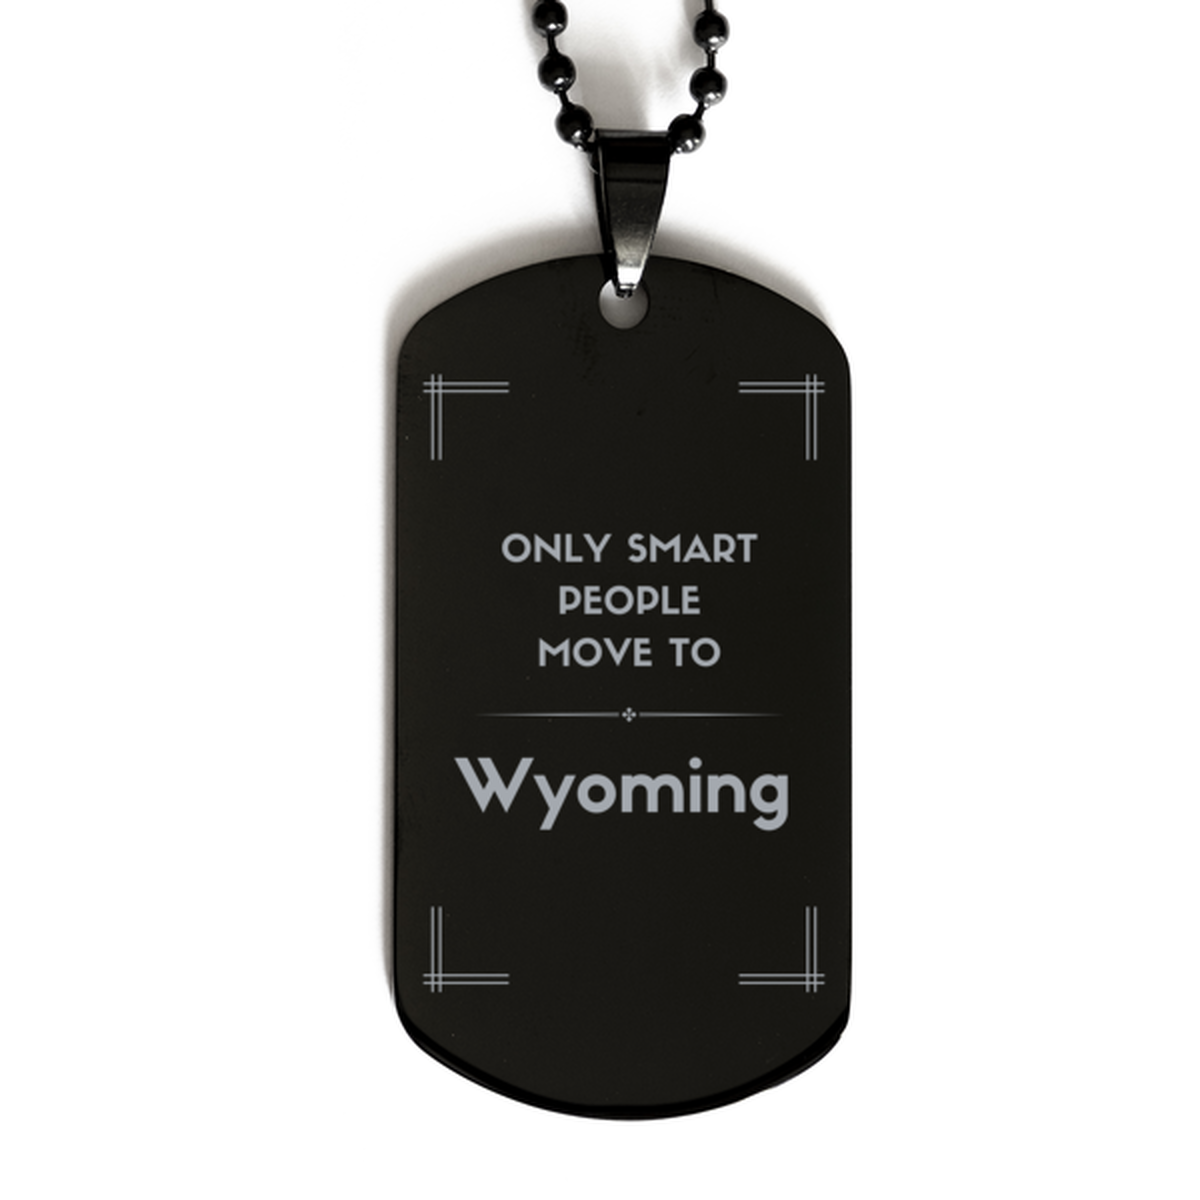 Only smart people move to Wyoming Black Dog Tag, Gag Gifts For Wyoming, Move to Wyoming Gifts for Friends Coworker Funny Saying Quote